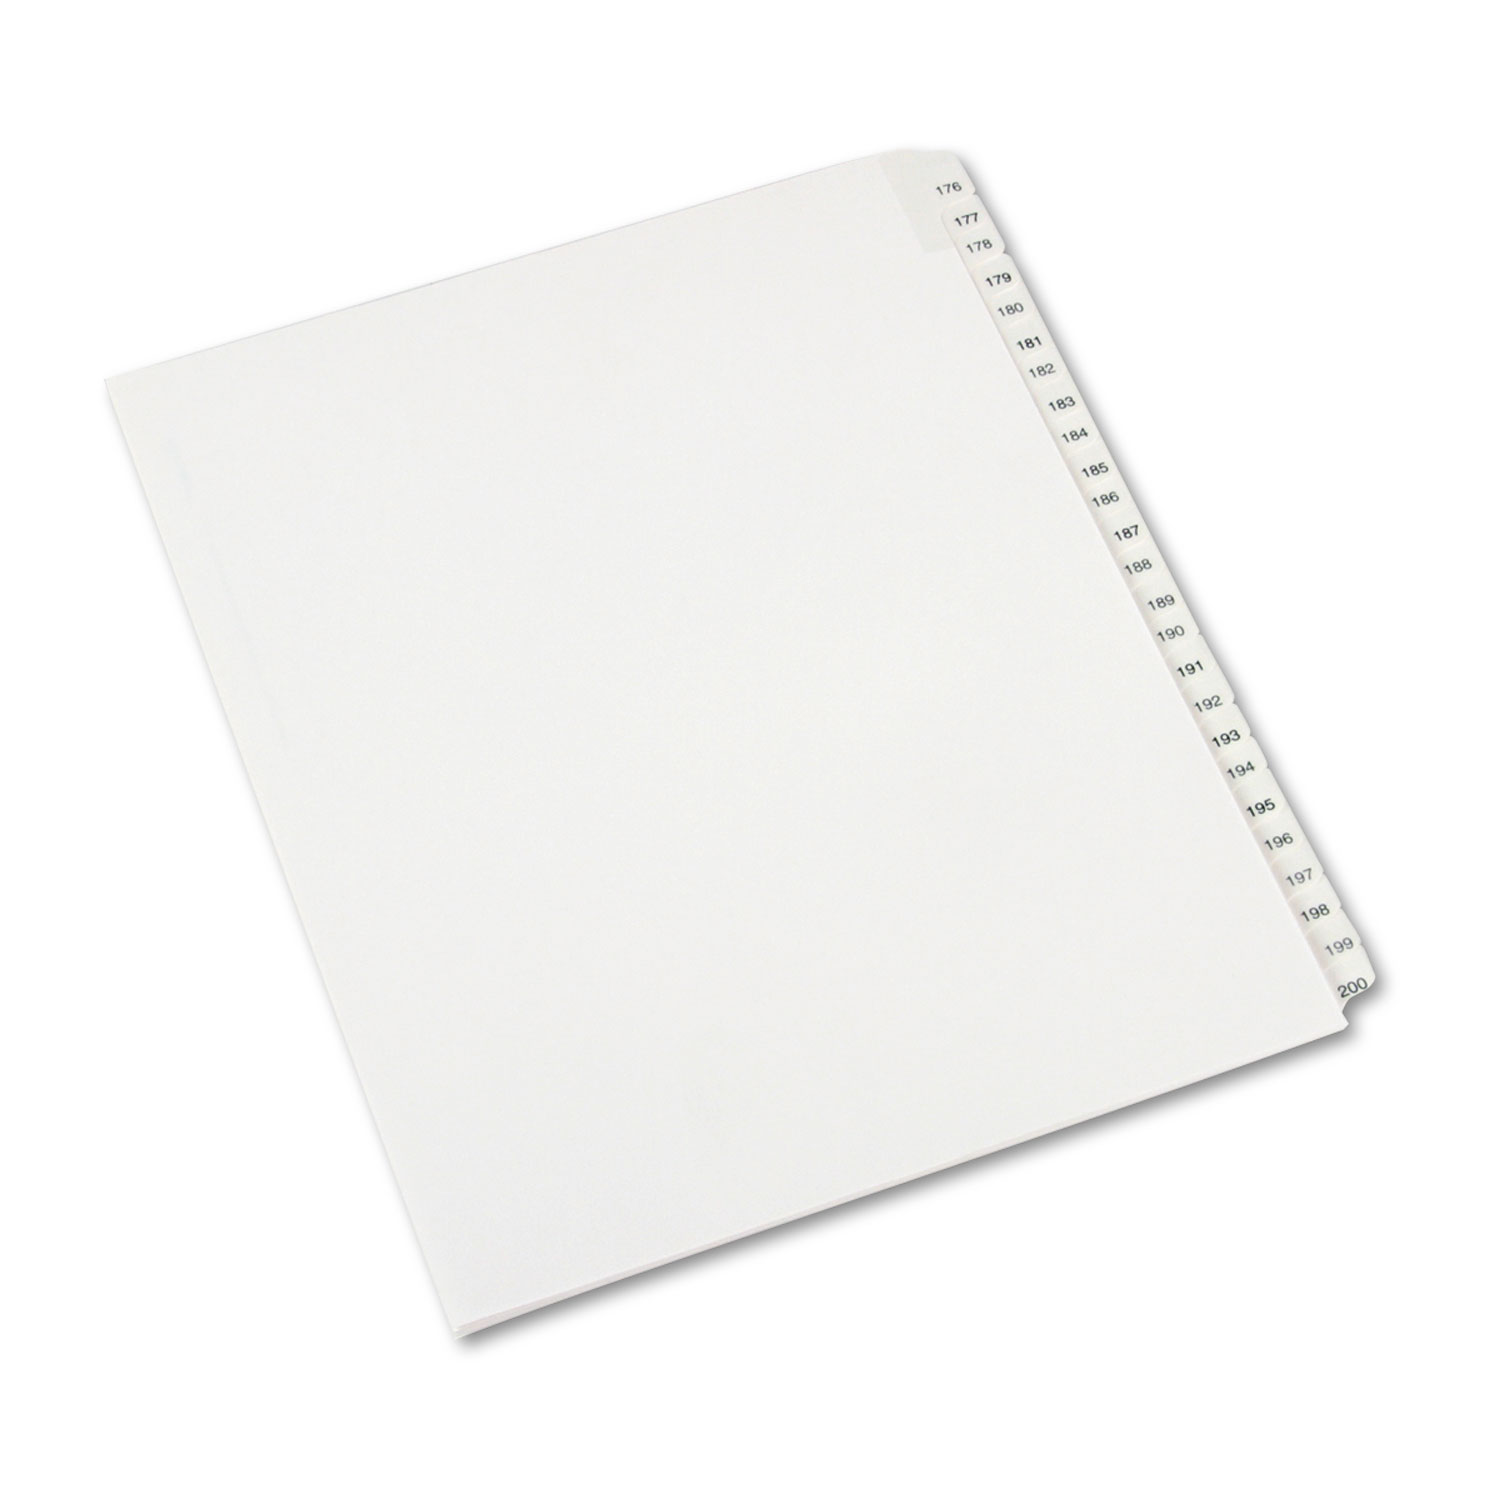  Avery 82190 Preprinted Legal Exhibit Side Tab Index Dividers, Allstate Style, 25-Tab, 176 to 200, 11 x 8.5, White, 1 Set (AVE82190) 